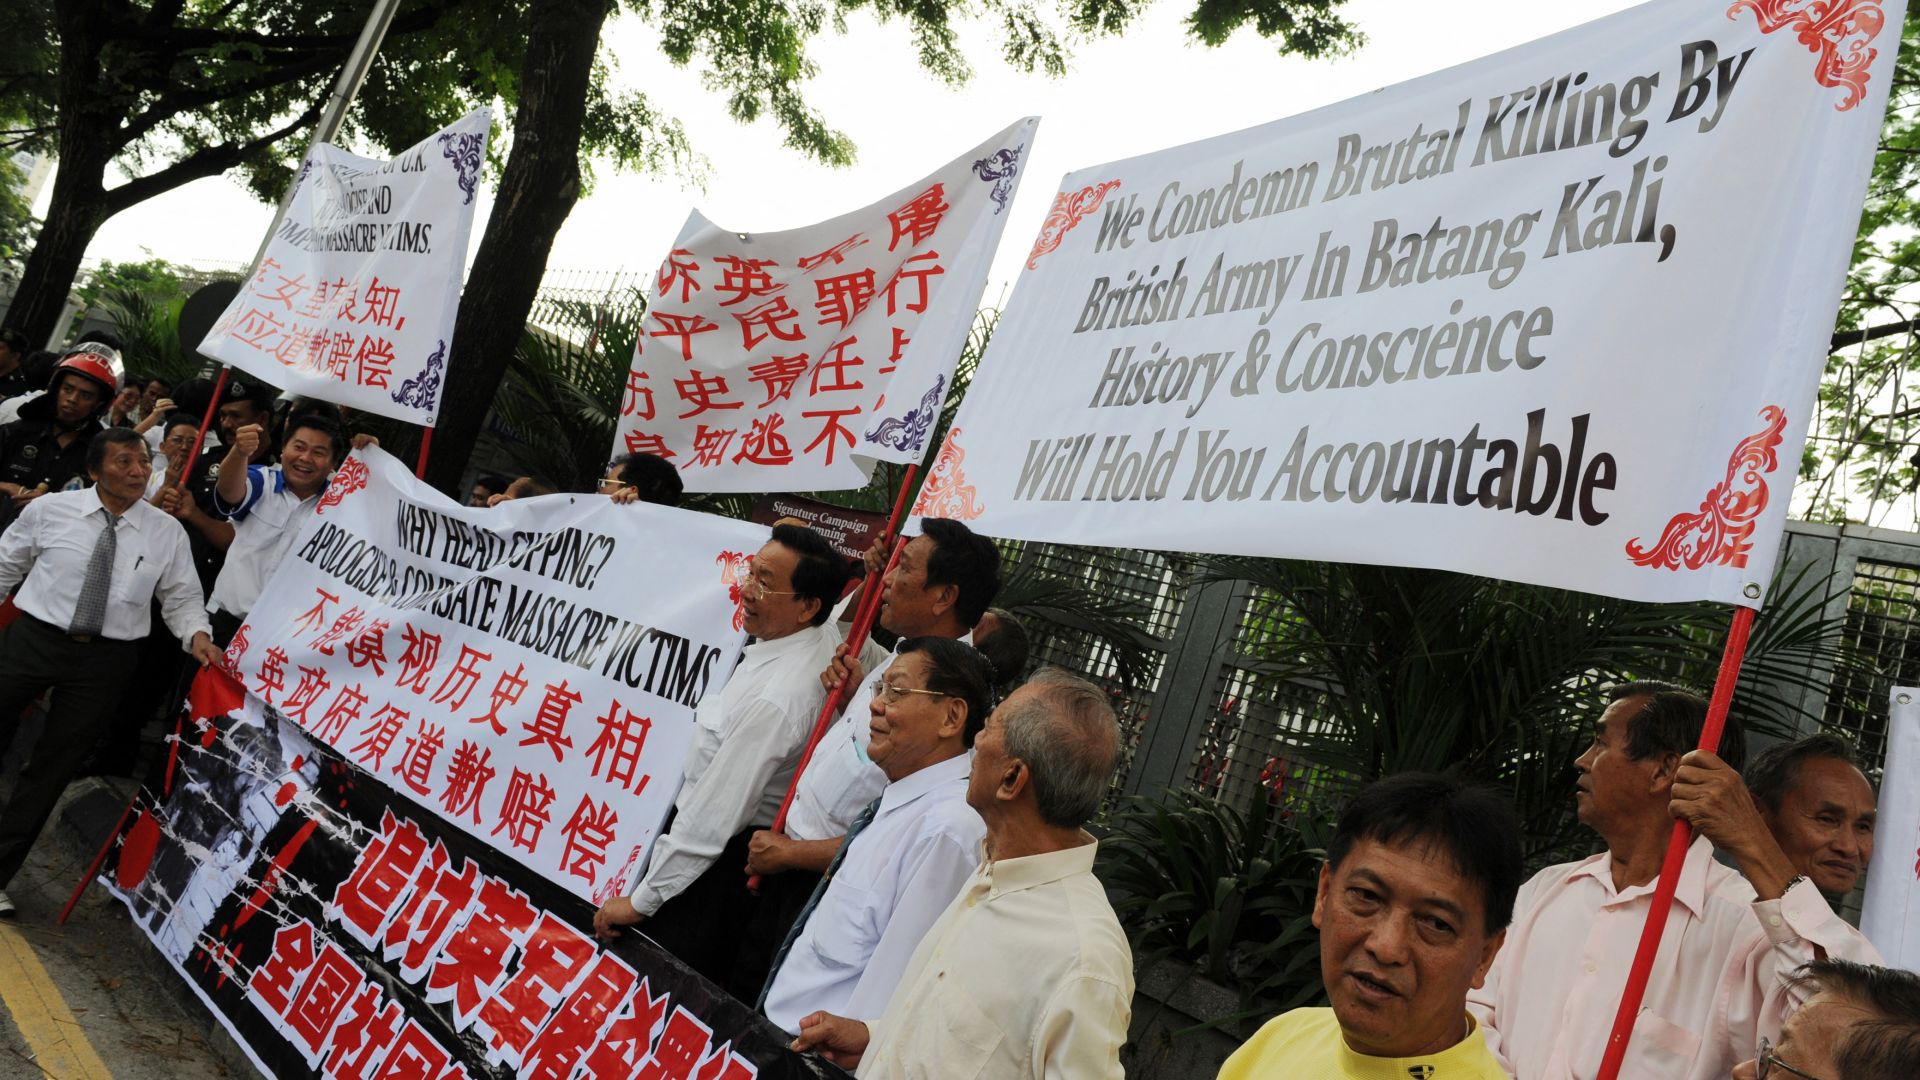 Ethnic Chinese hold banners in front of the British High Commission building in Kuala Lumpur on December 12, 2008 during a demonstration to condemn an historic Batang Kali massacre. Scores of protestors who gathered at the British High Commission building in Kuala Lumpur condemned the killing of 24 unarmed villagers by the British Army in 1948 in Batang Kali and demanded an apology from Britain and compensation to the victim's families. AFP PHOTO / Saeed KHAN (Photo by SAEED KHAN / AFP)